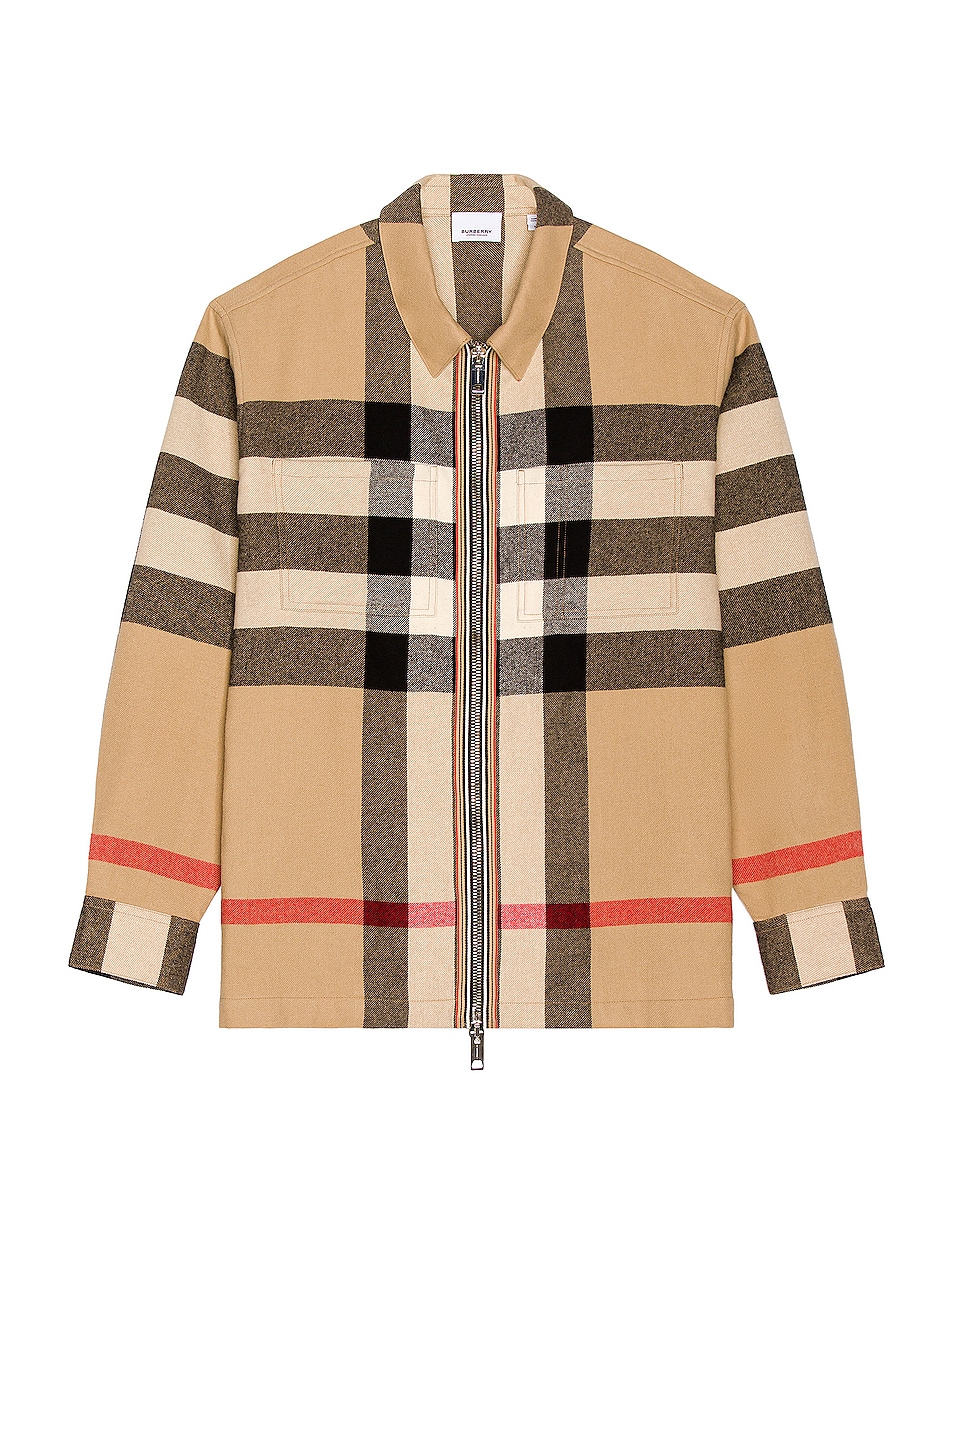 Image 1 of Burberry Hague Shirt in Archive Beige Check